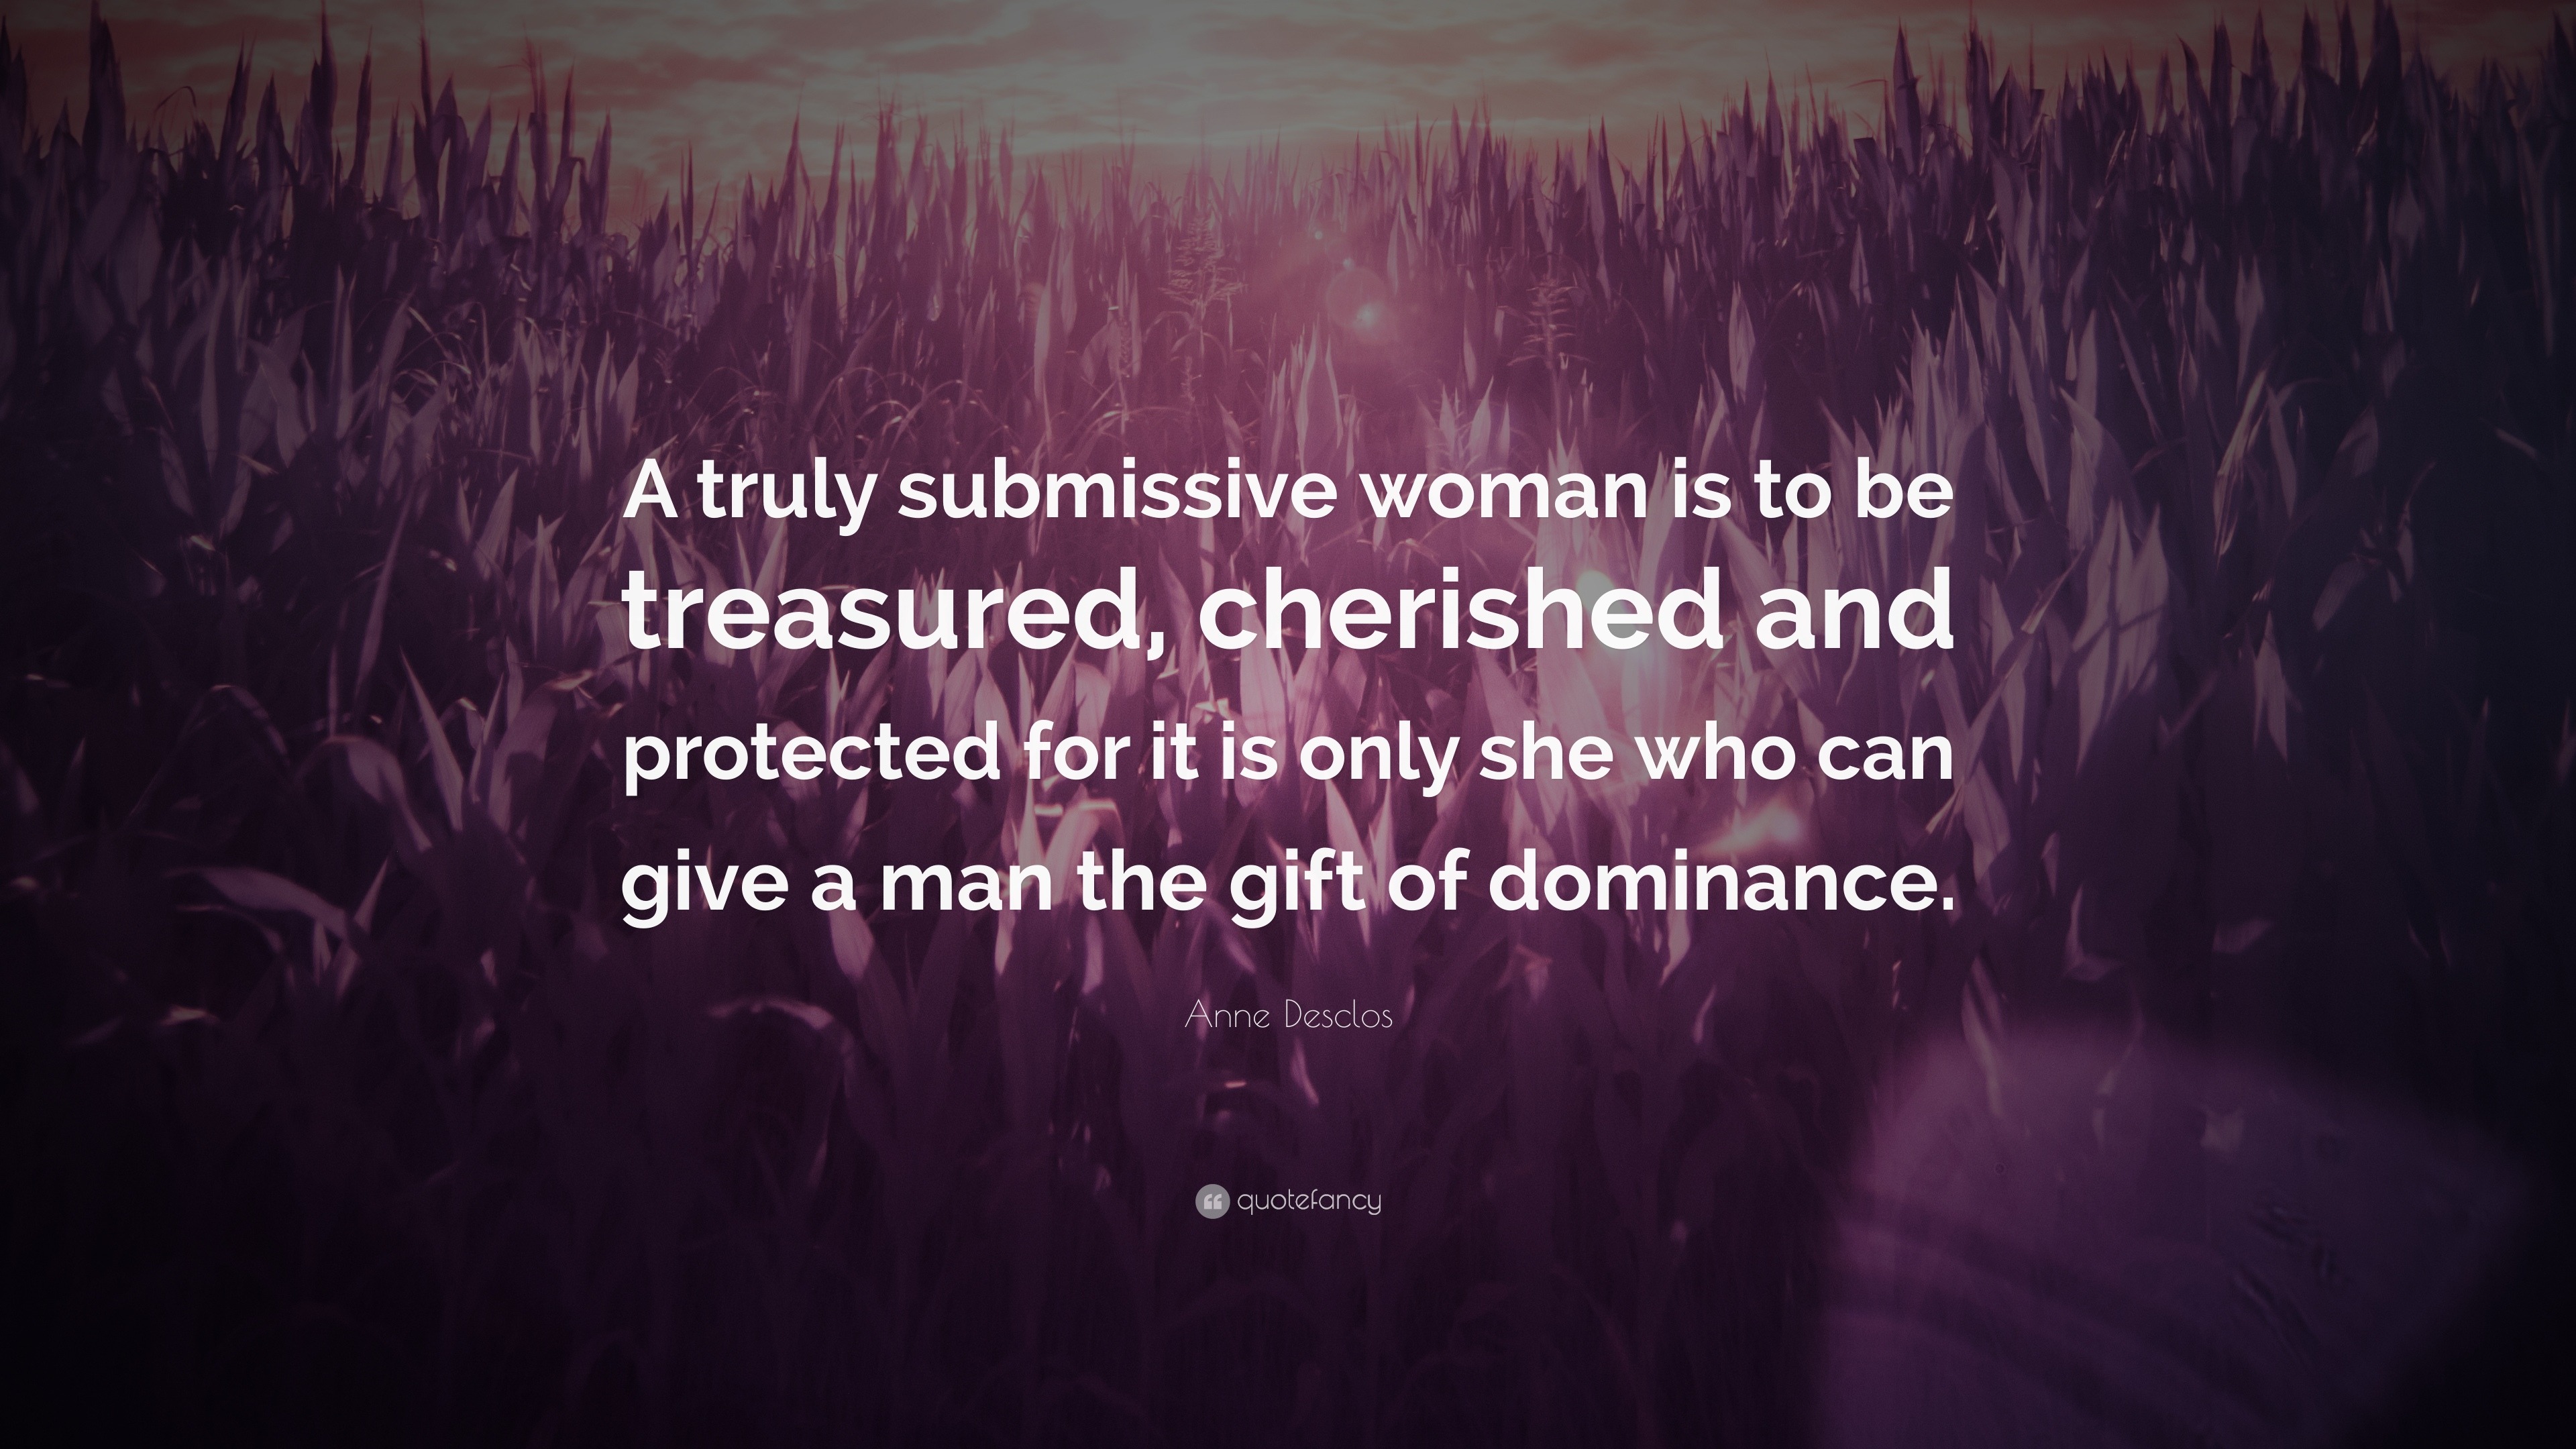 Quotes submissive to dominant Why Women